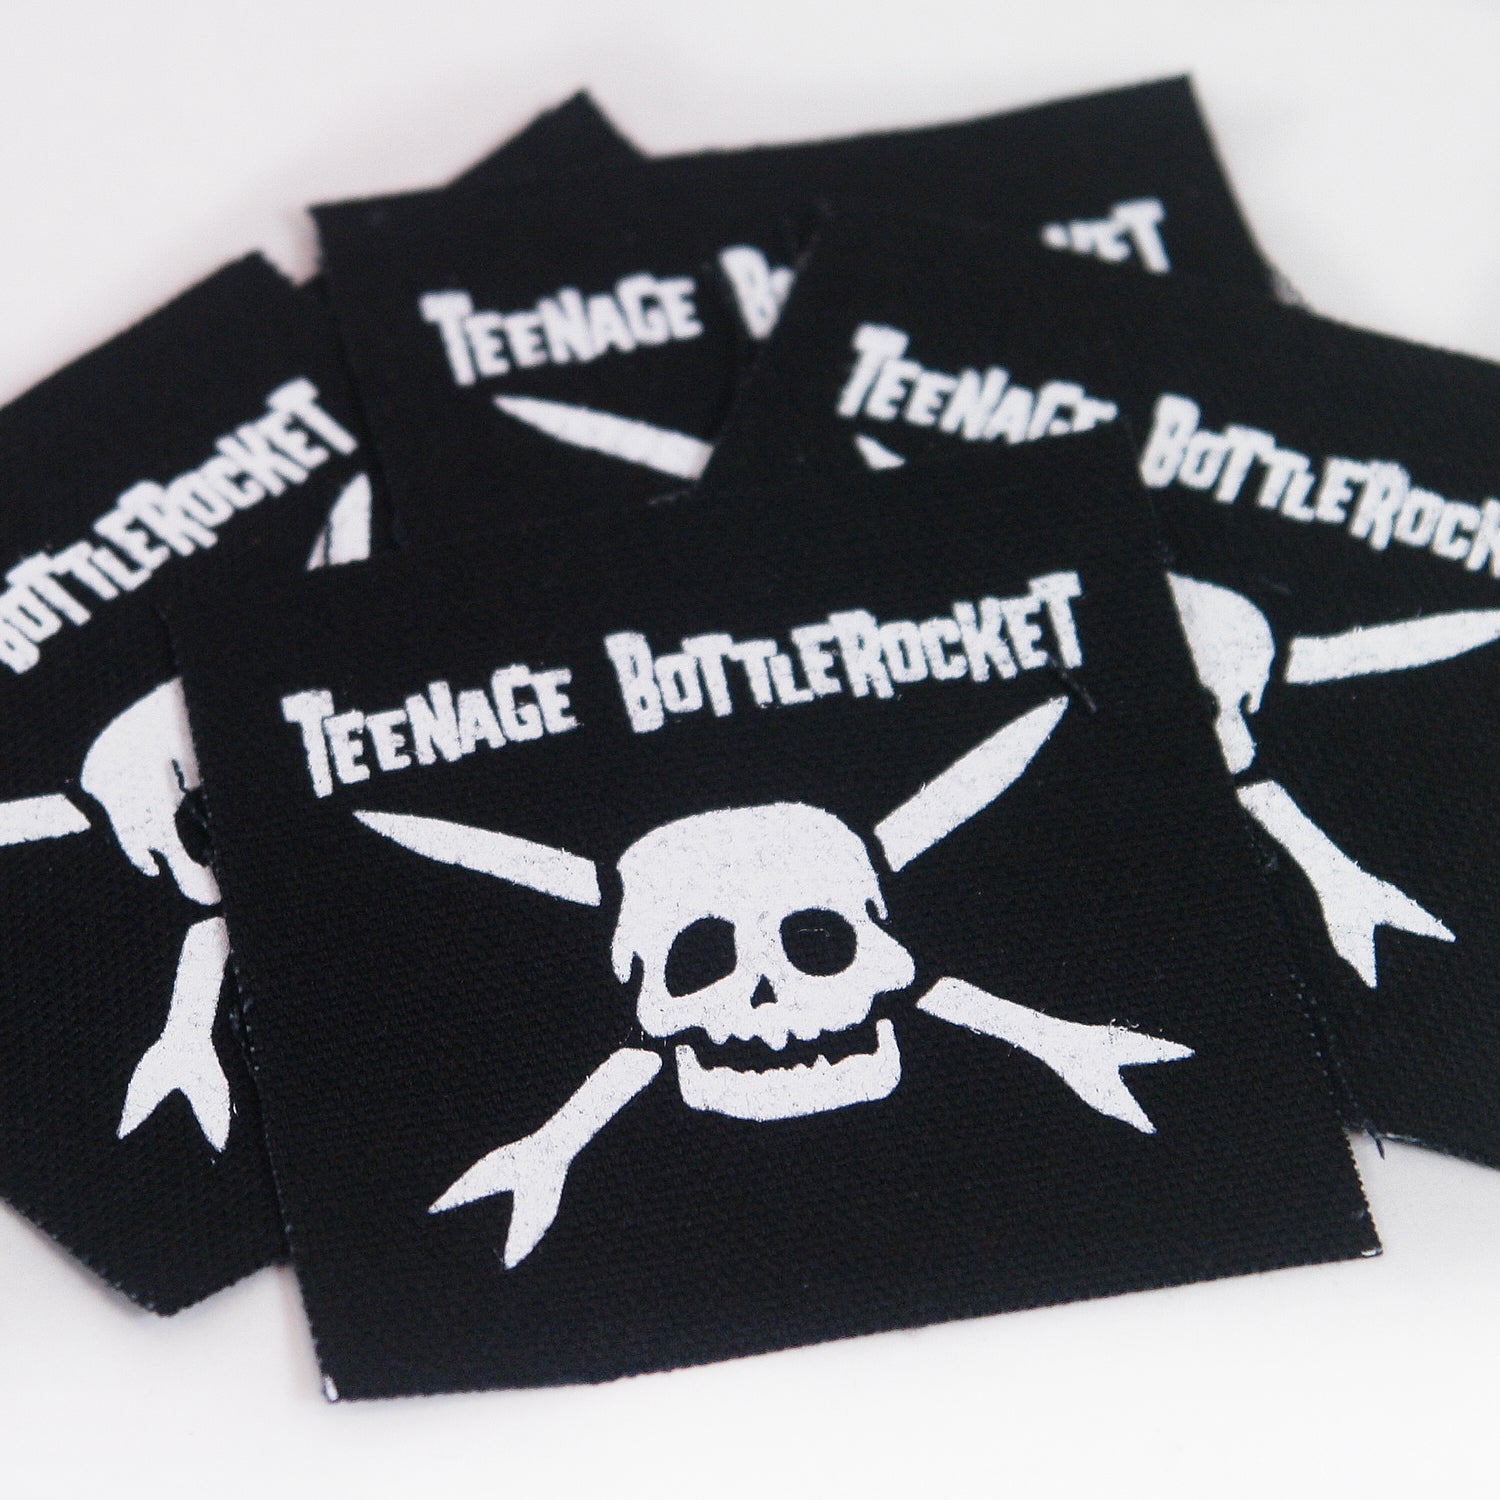 Image of several black patches against a white background. The patch says teenage bottlerocket in white text and below that is the teenage bottlerocket logo of a skull with cross arrows, also in white.